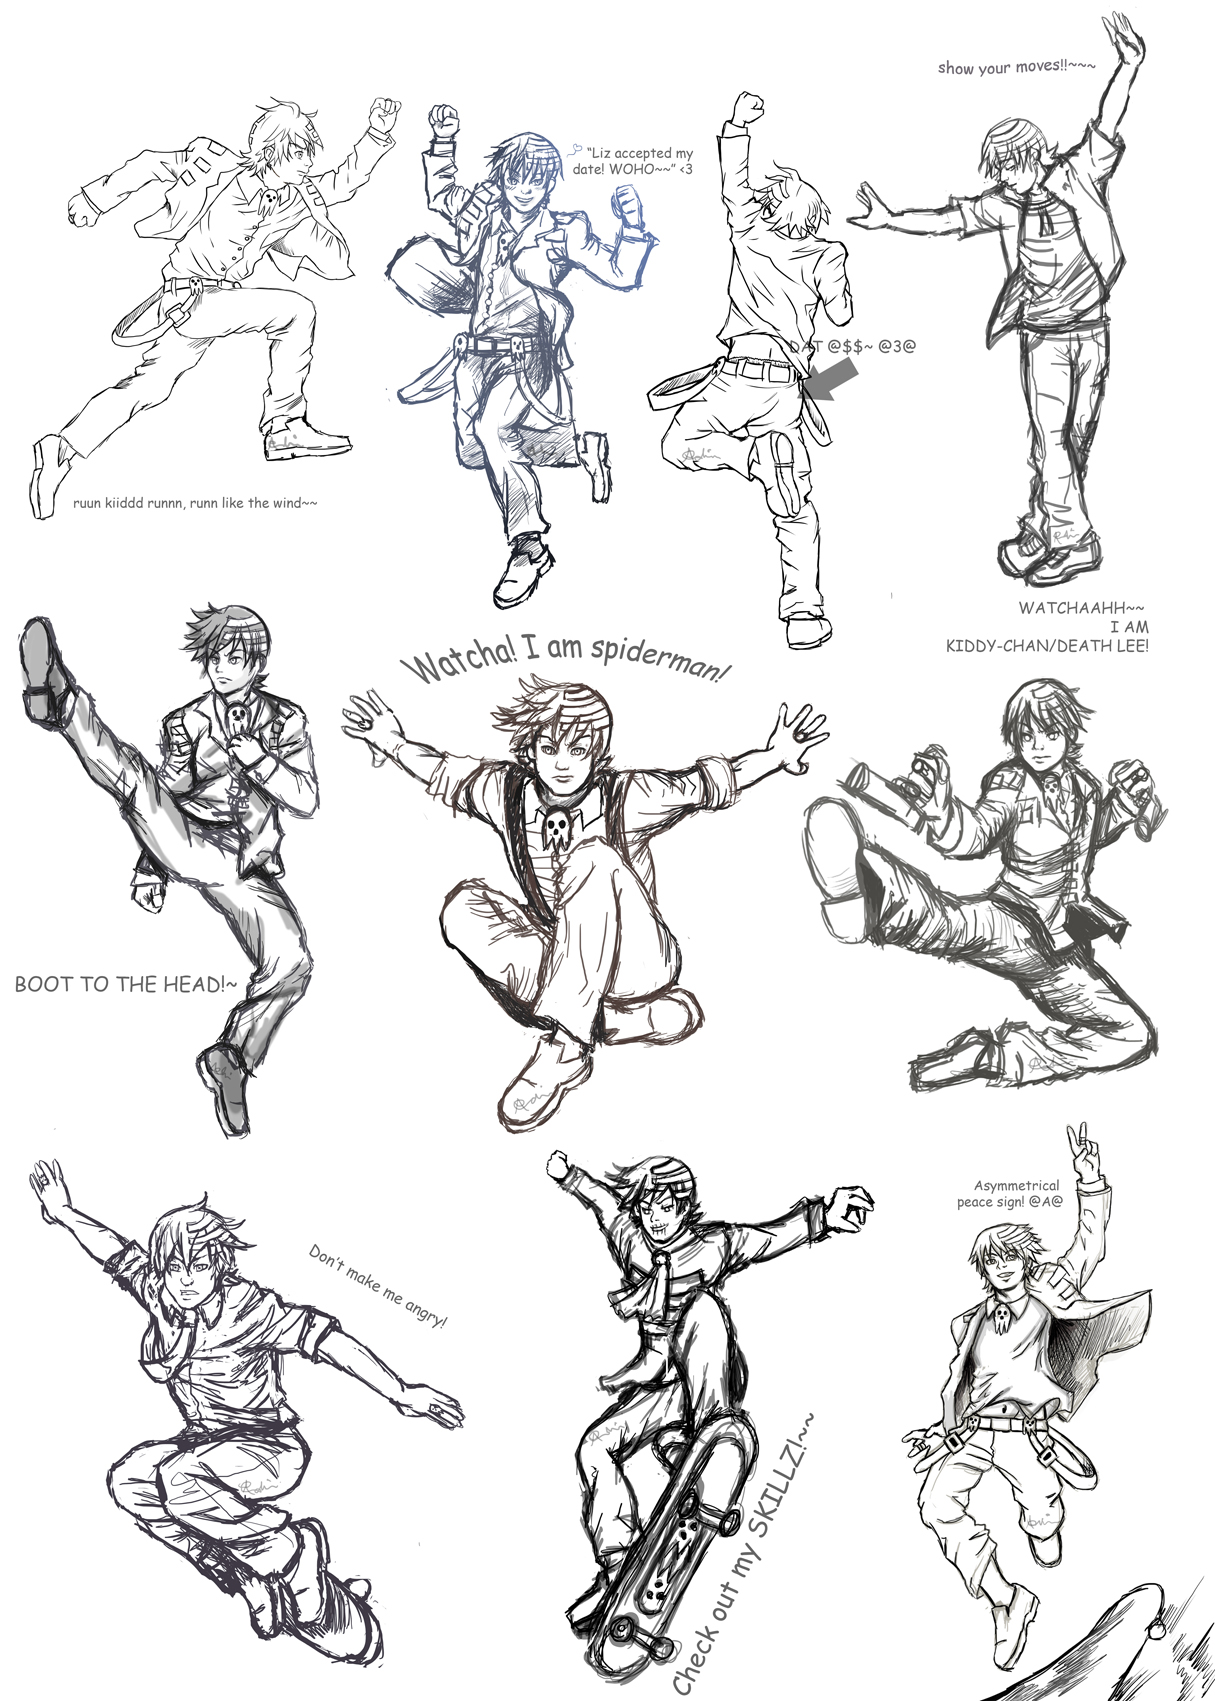 DTK Poses Collage1 Sketches2 by AllysAO on DeviantArt